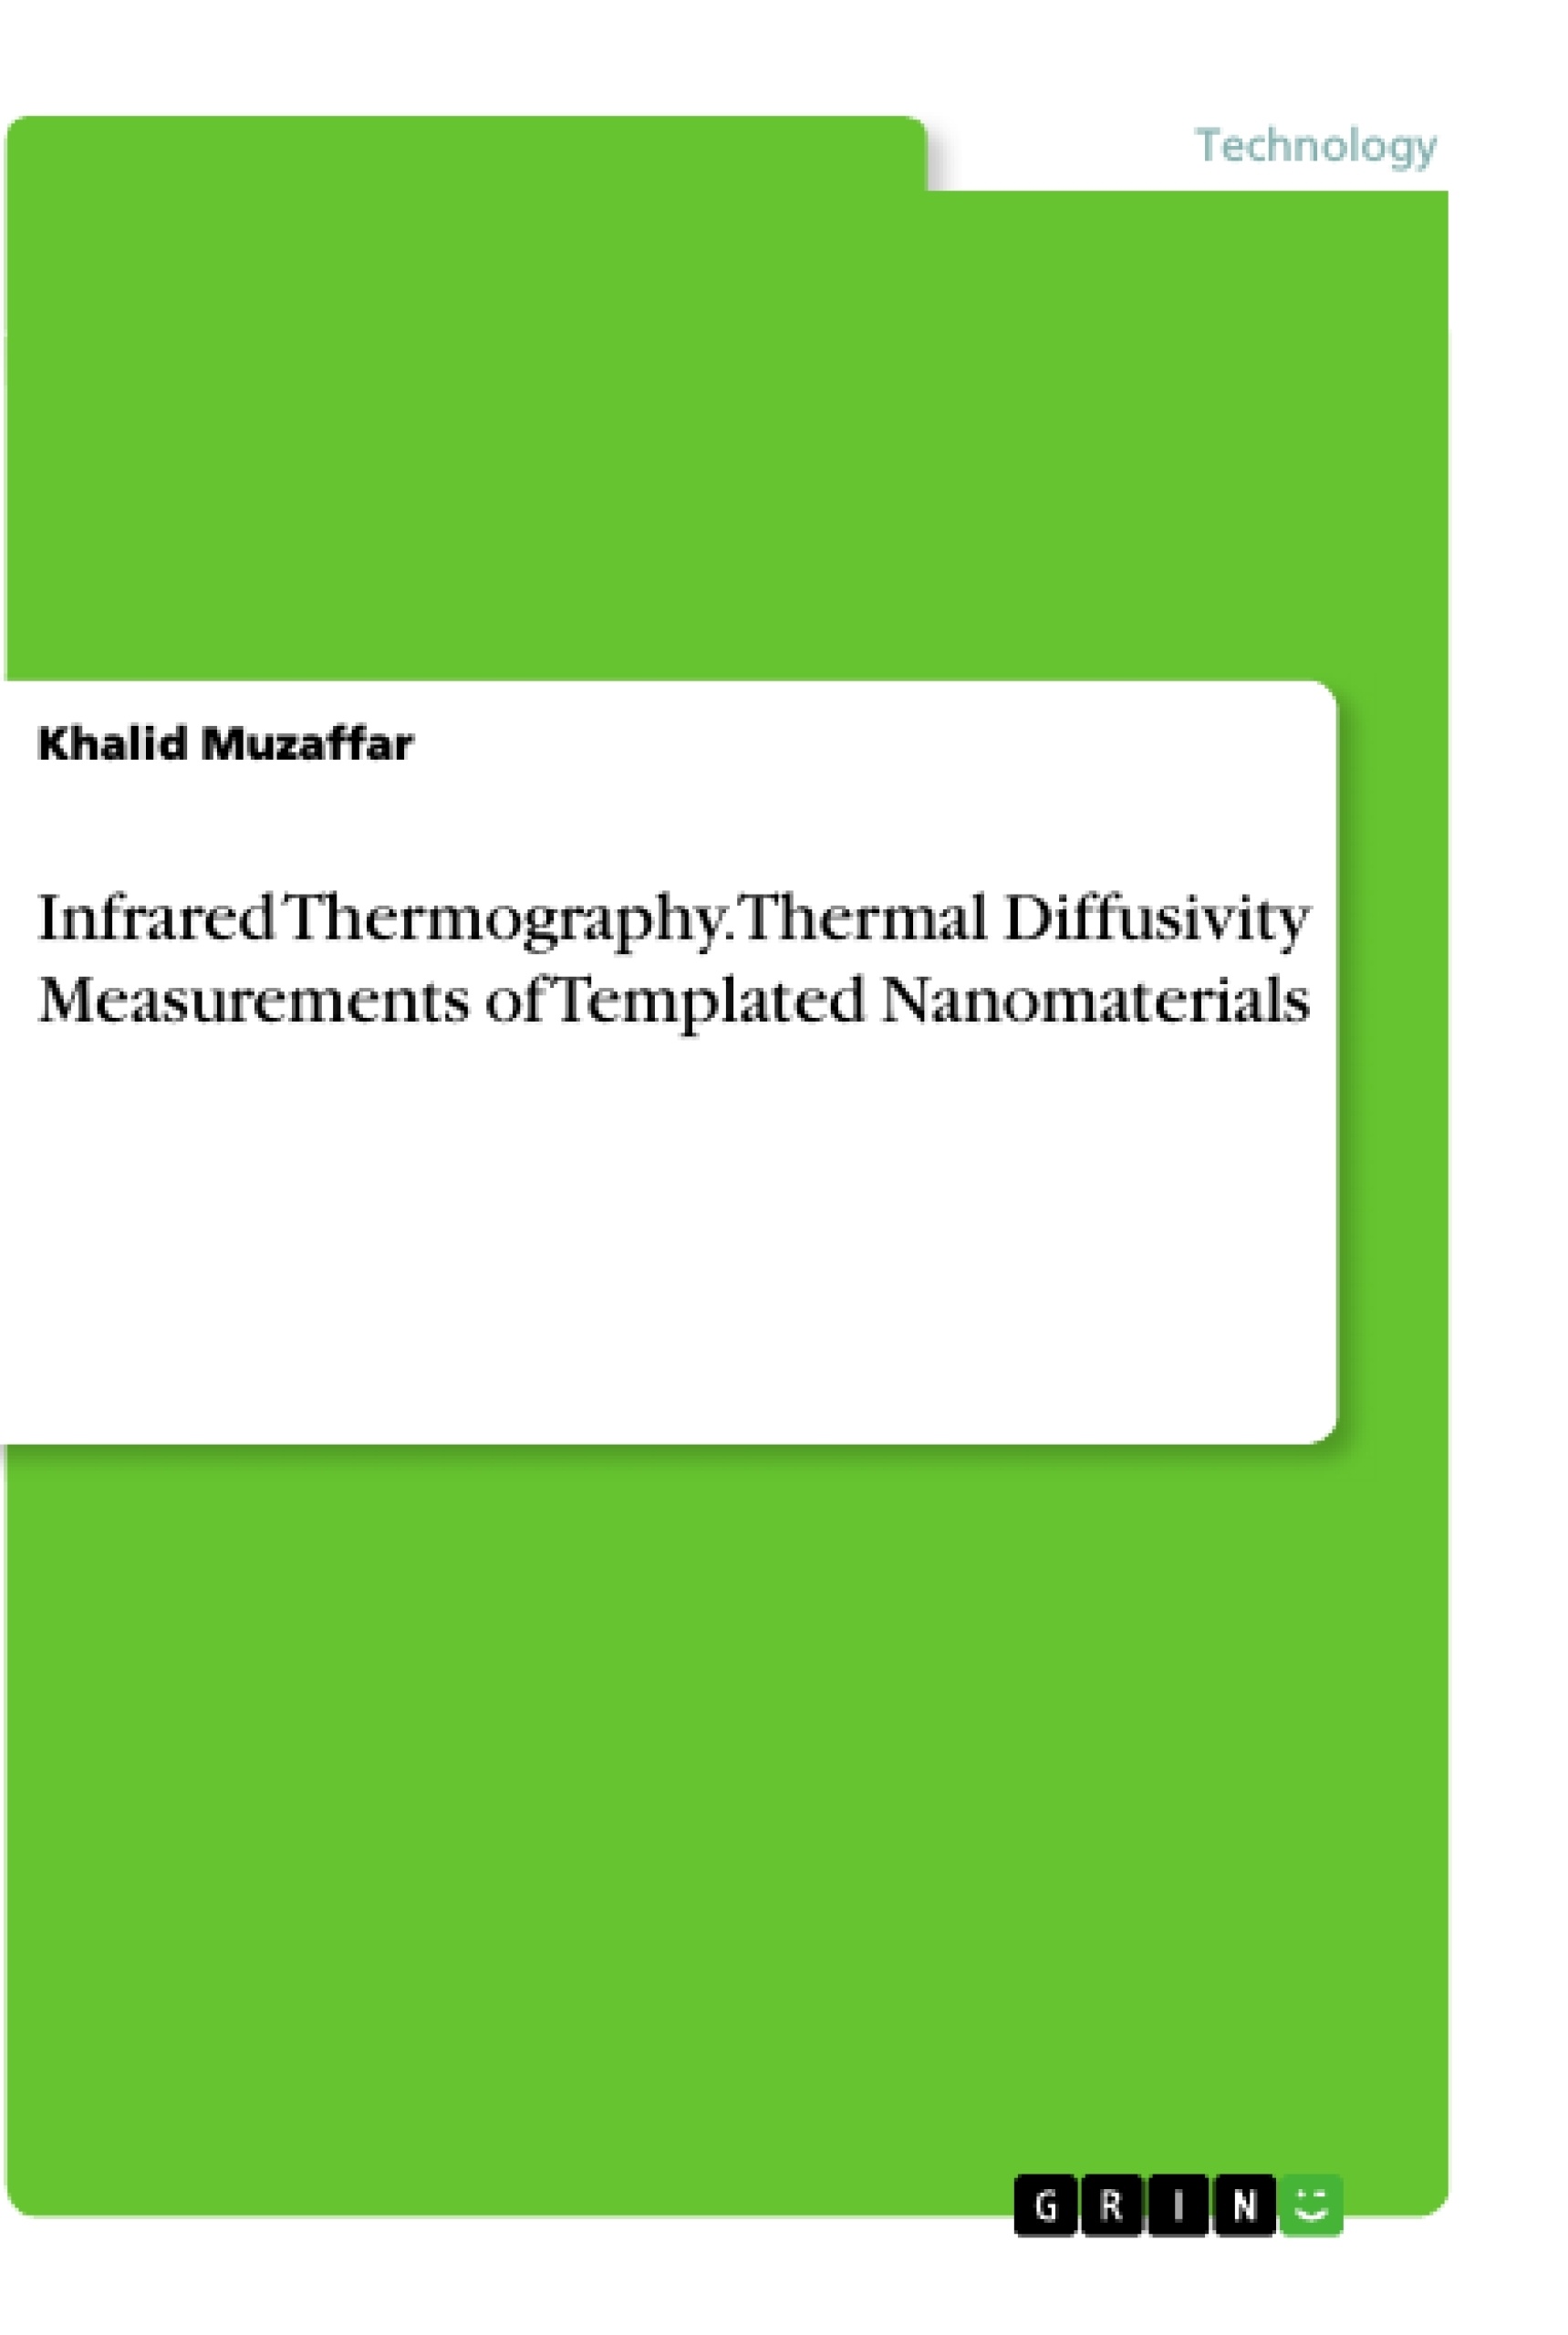 Titre: Infrared Thermography. Thermal Diffusivity Measurements of Templated Nanomaterials